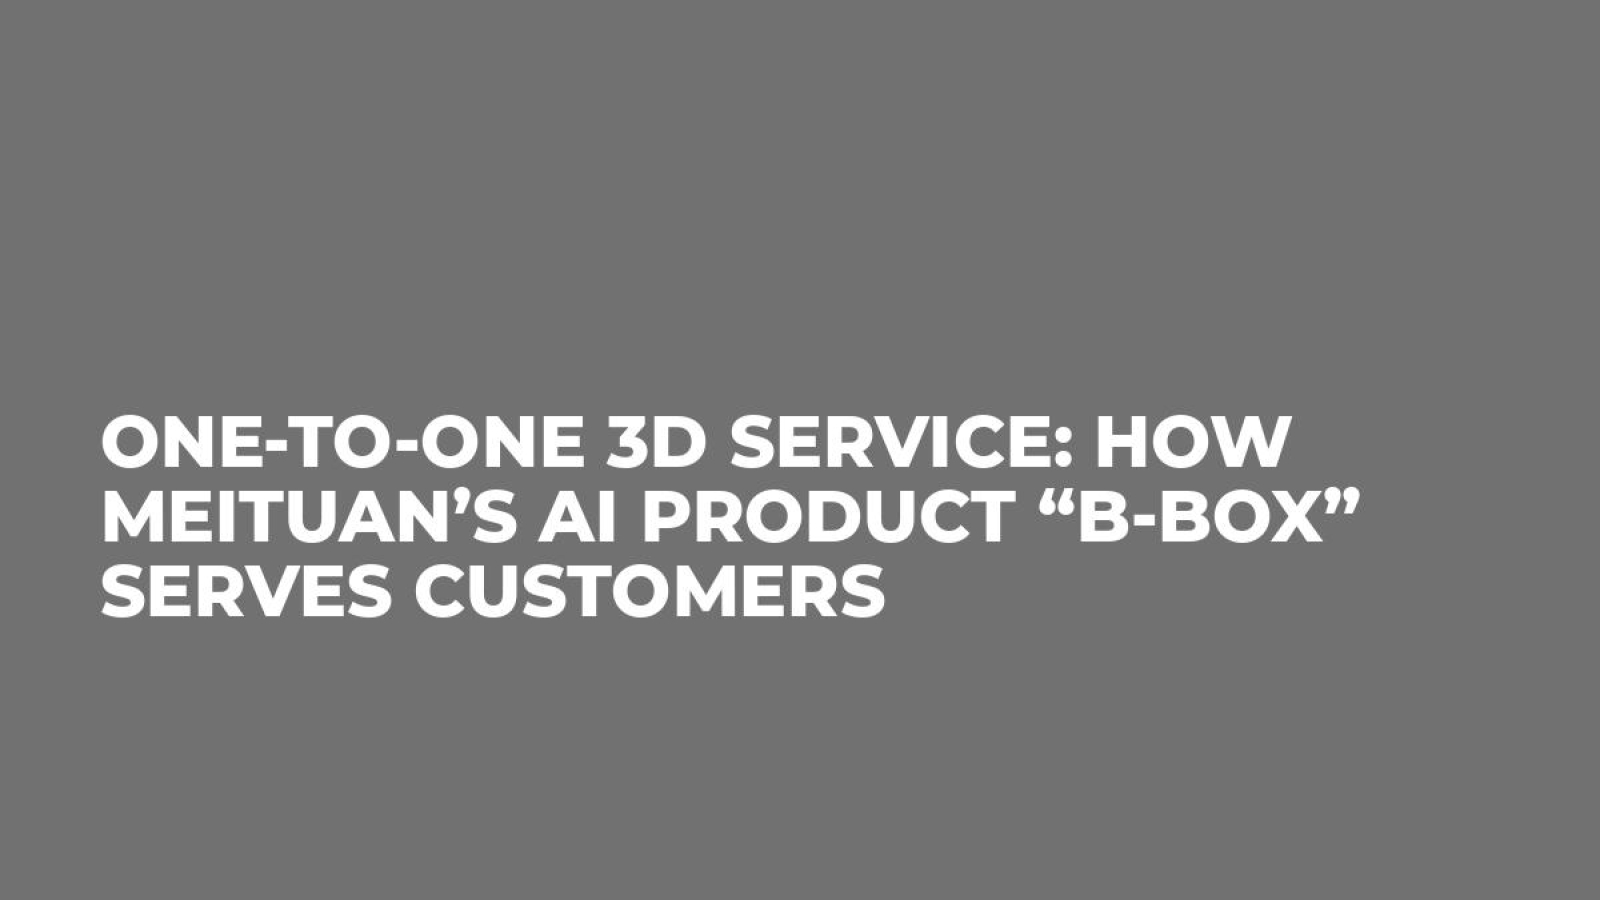 One-to-One 3D Service: How Meituan’s AI Product “B-BOX” Serves Customers